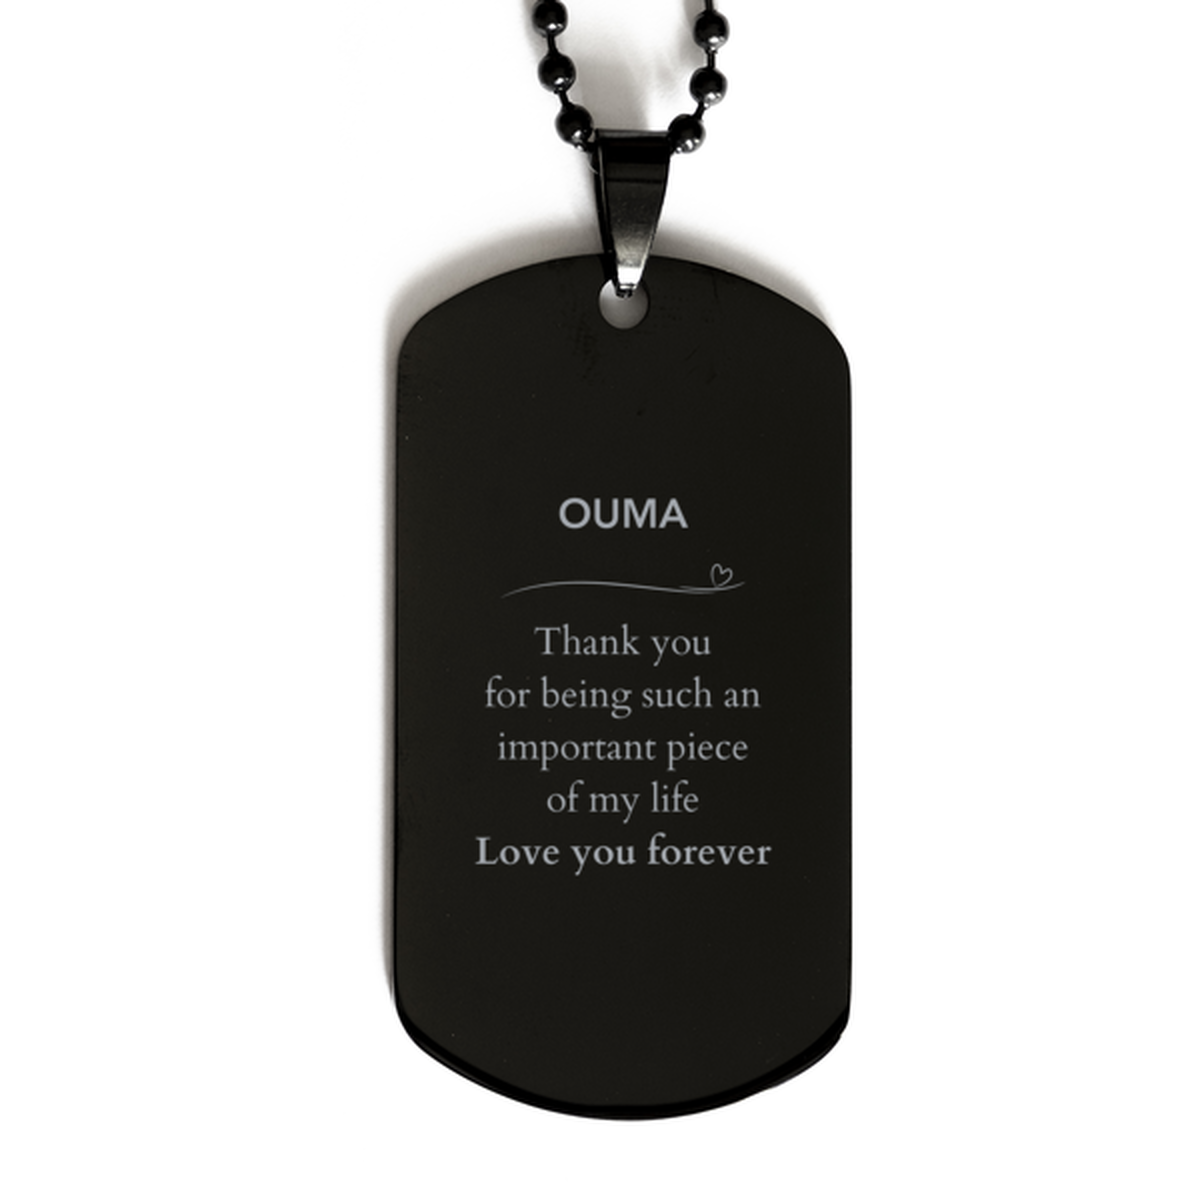 Appropriate Ouma Black Dog Tag Epic Birthday Gifts for Ouma Thank you for being such an important piece of my life Ouma Christmas Mothers Fathers Day